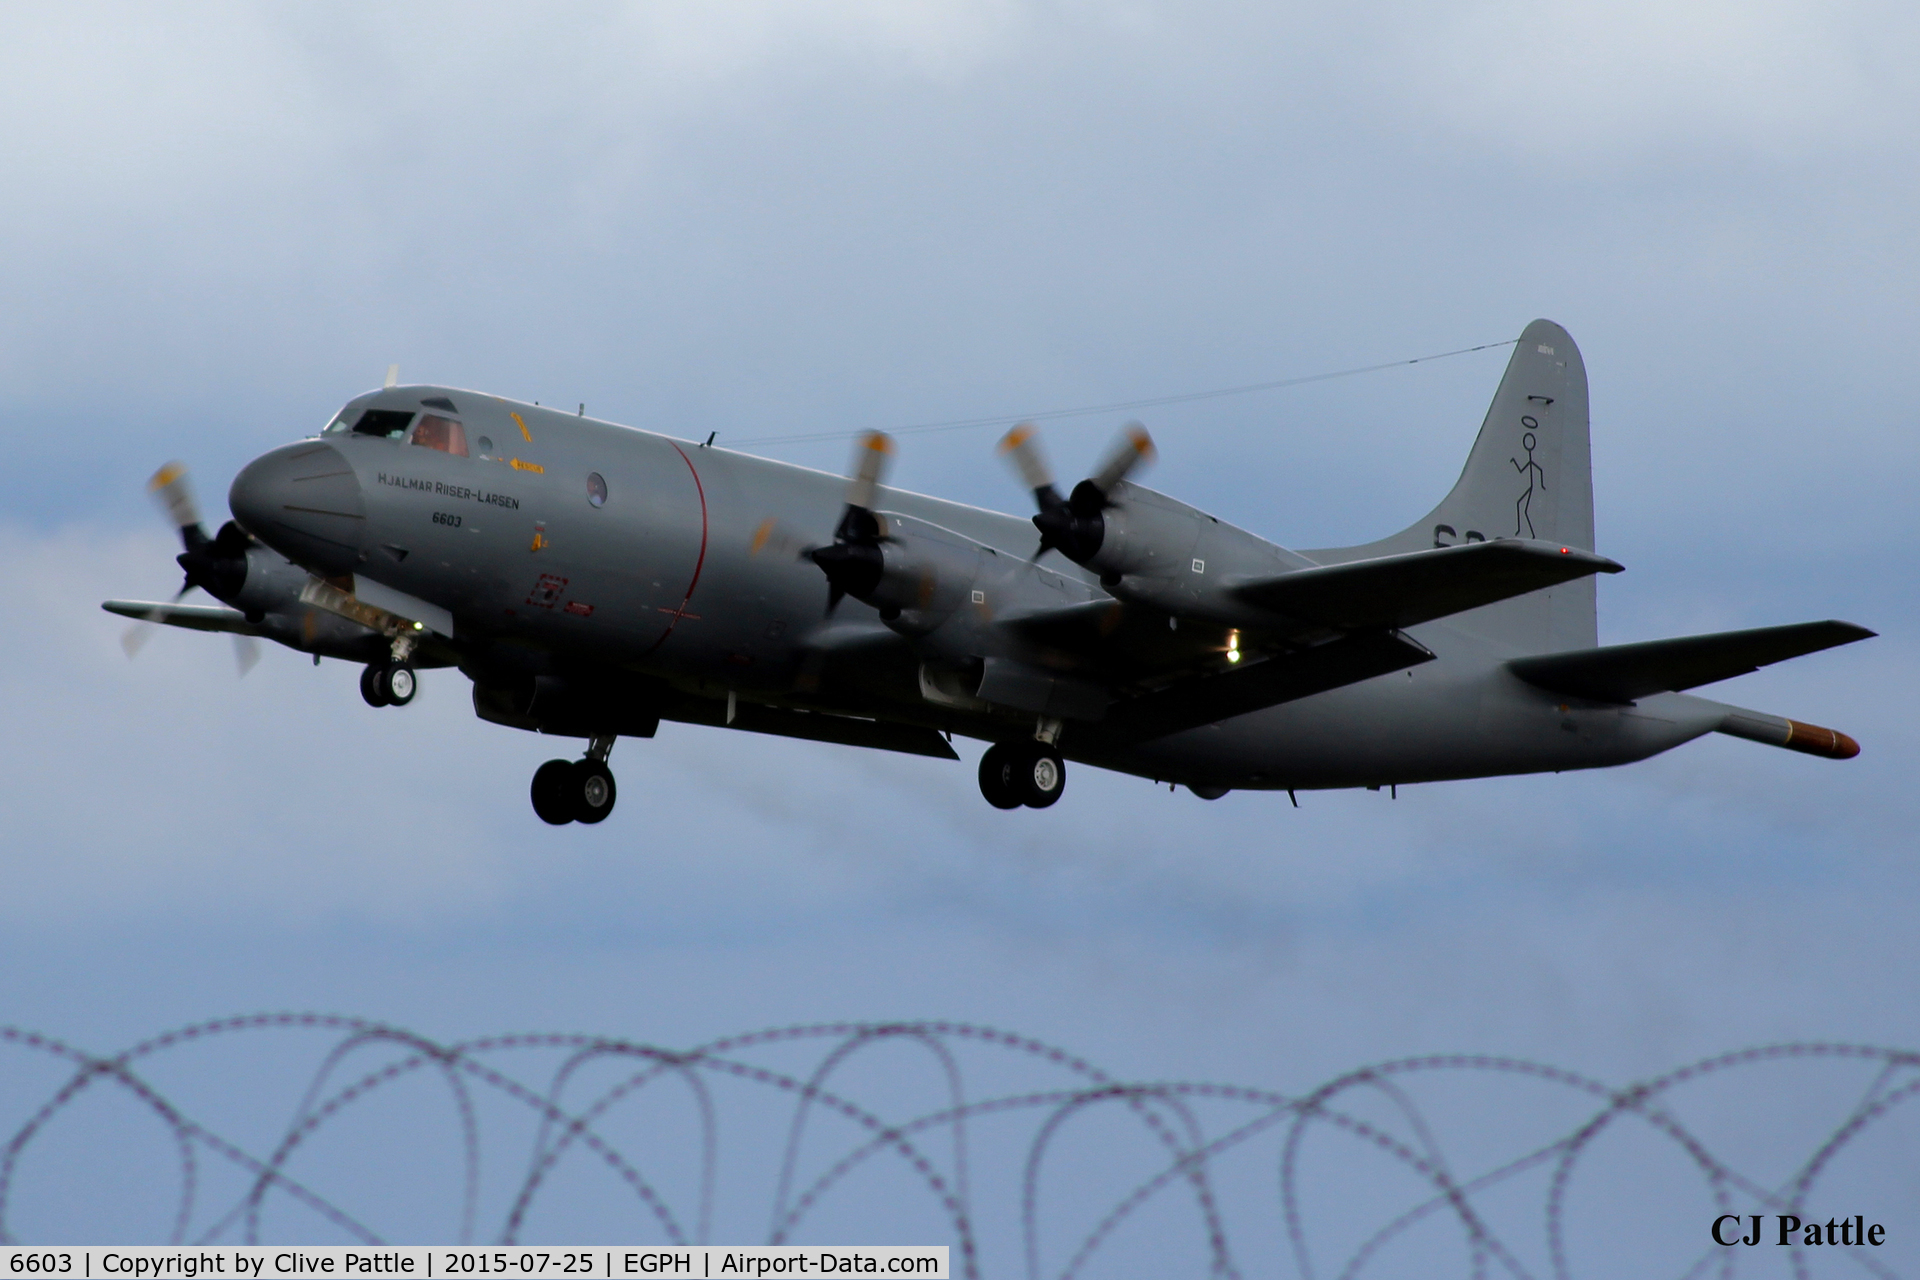 6603, Lockheed P-3N Orion C/N 185C-5305, Over the fence - Departure from Edinburgh EGPH to take part in an Airshow at nearby East Fortune